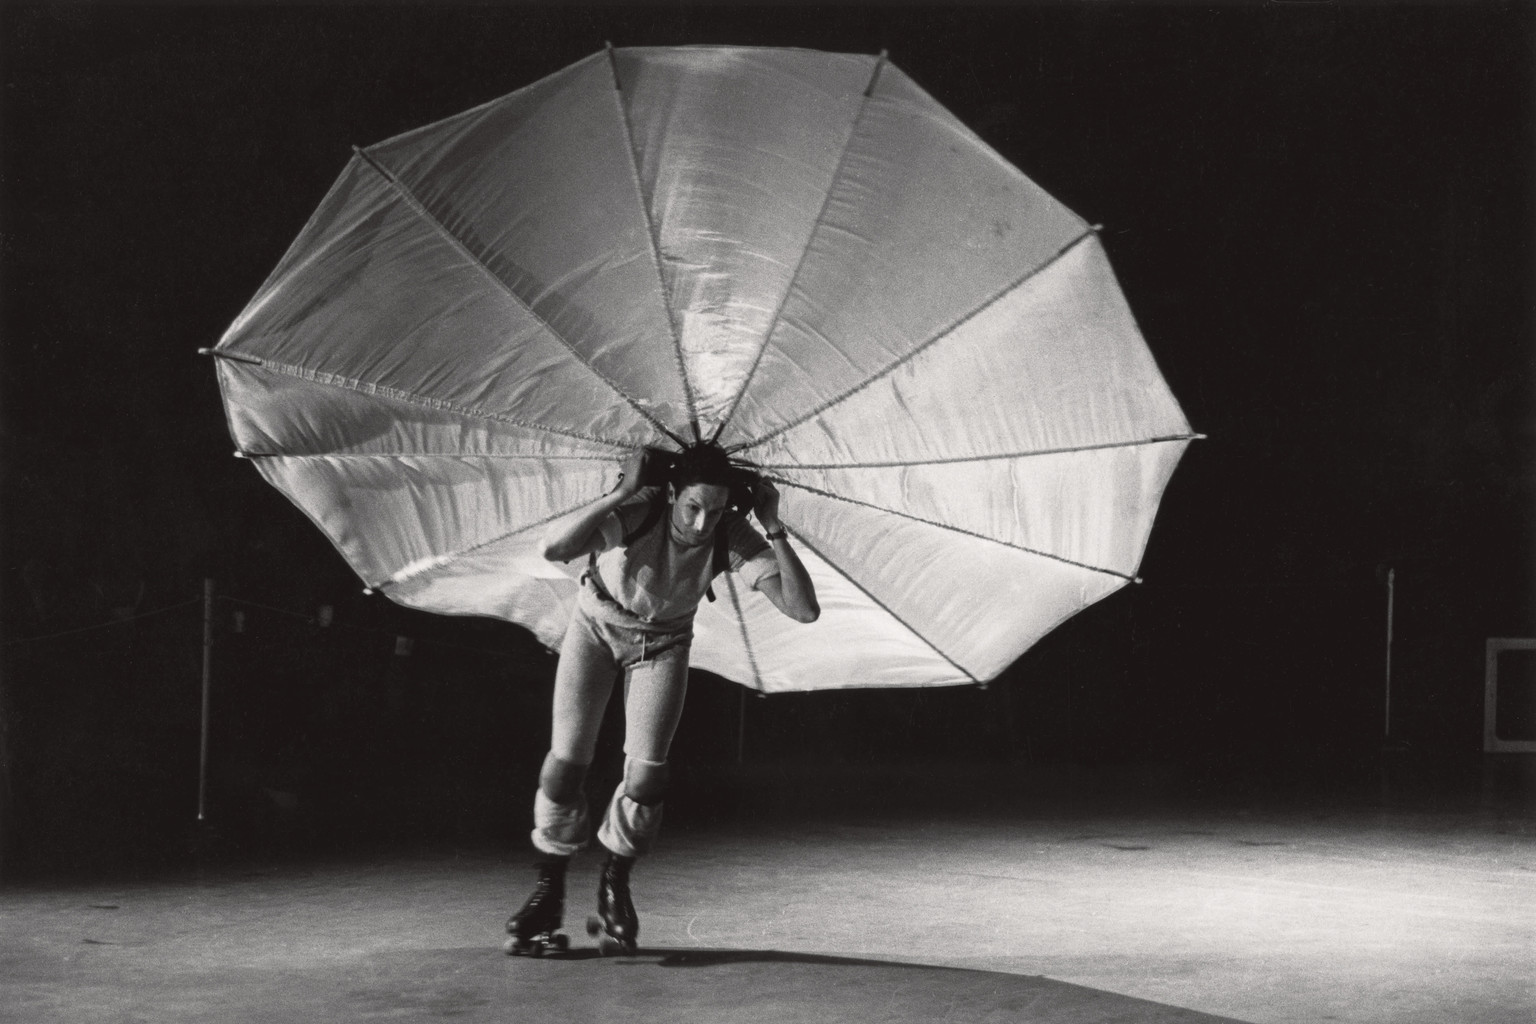 Peter Moore. Photograph of Robert Rauschenberg’s Pelican (1963) as performed in a former CBS television studio, New York, during the First New York Theater Rally, May 1965. © Barbara Moore/Licensed by VAGA, New York, NY, courtesy Paula Cooper Gallery, New York.